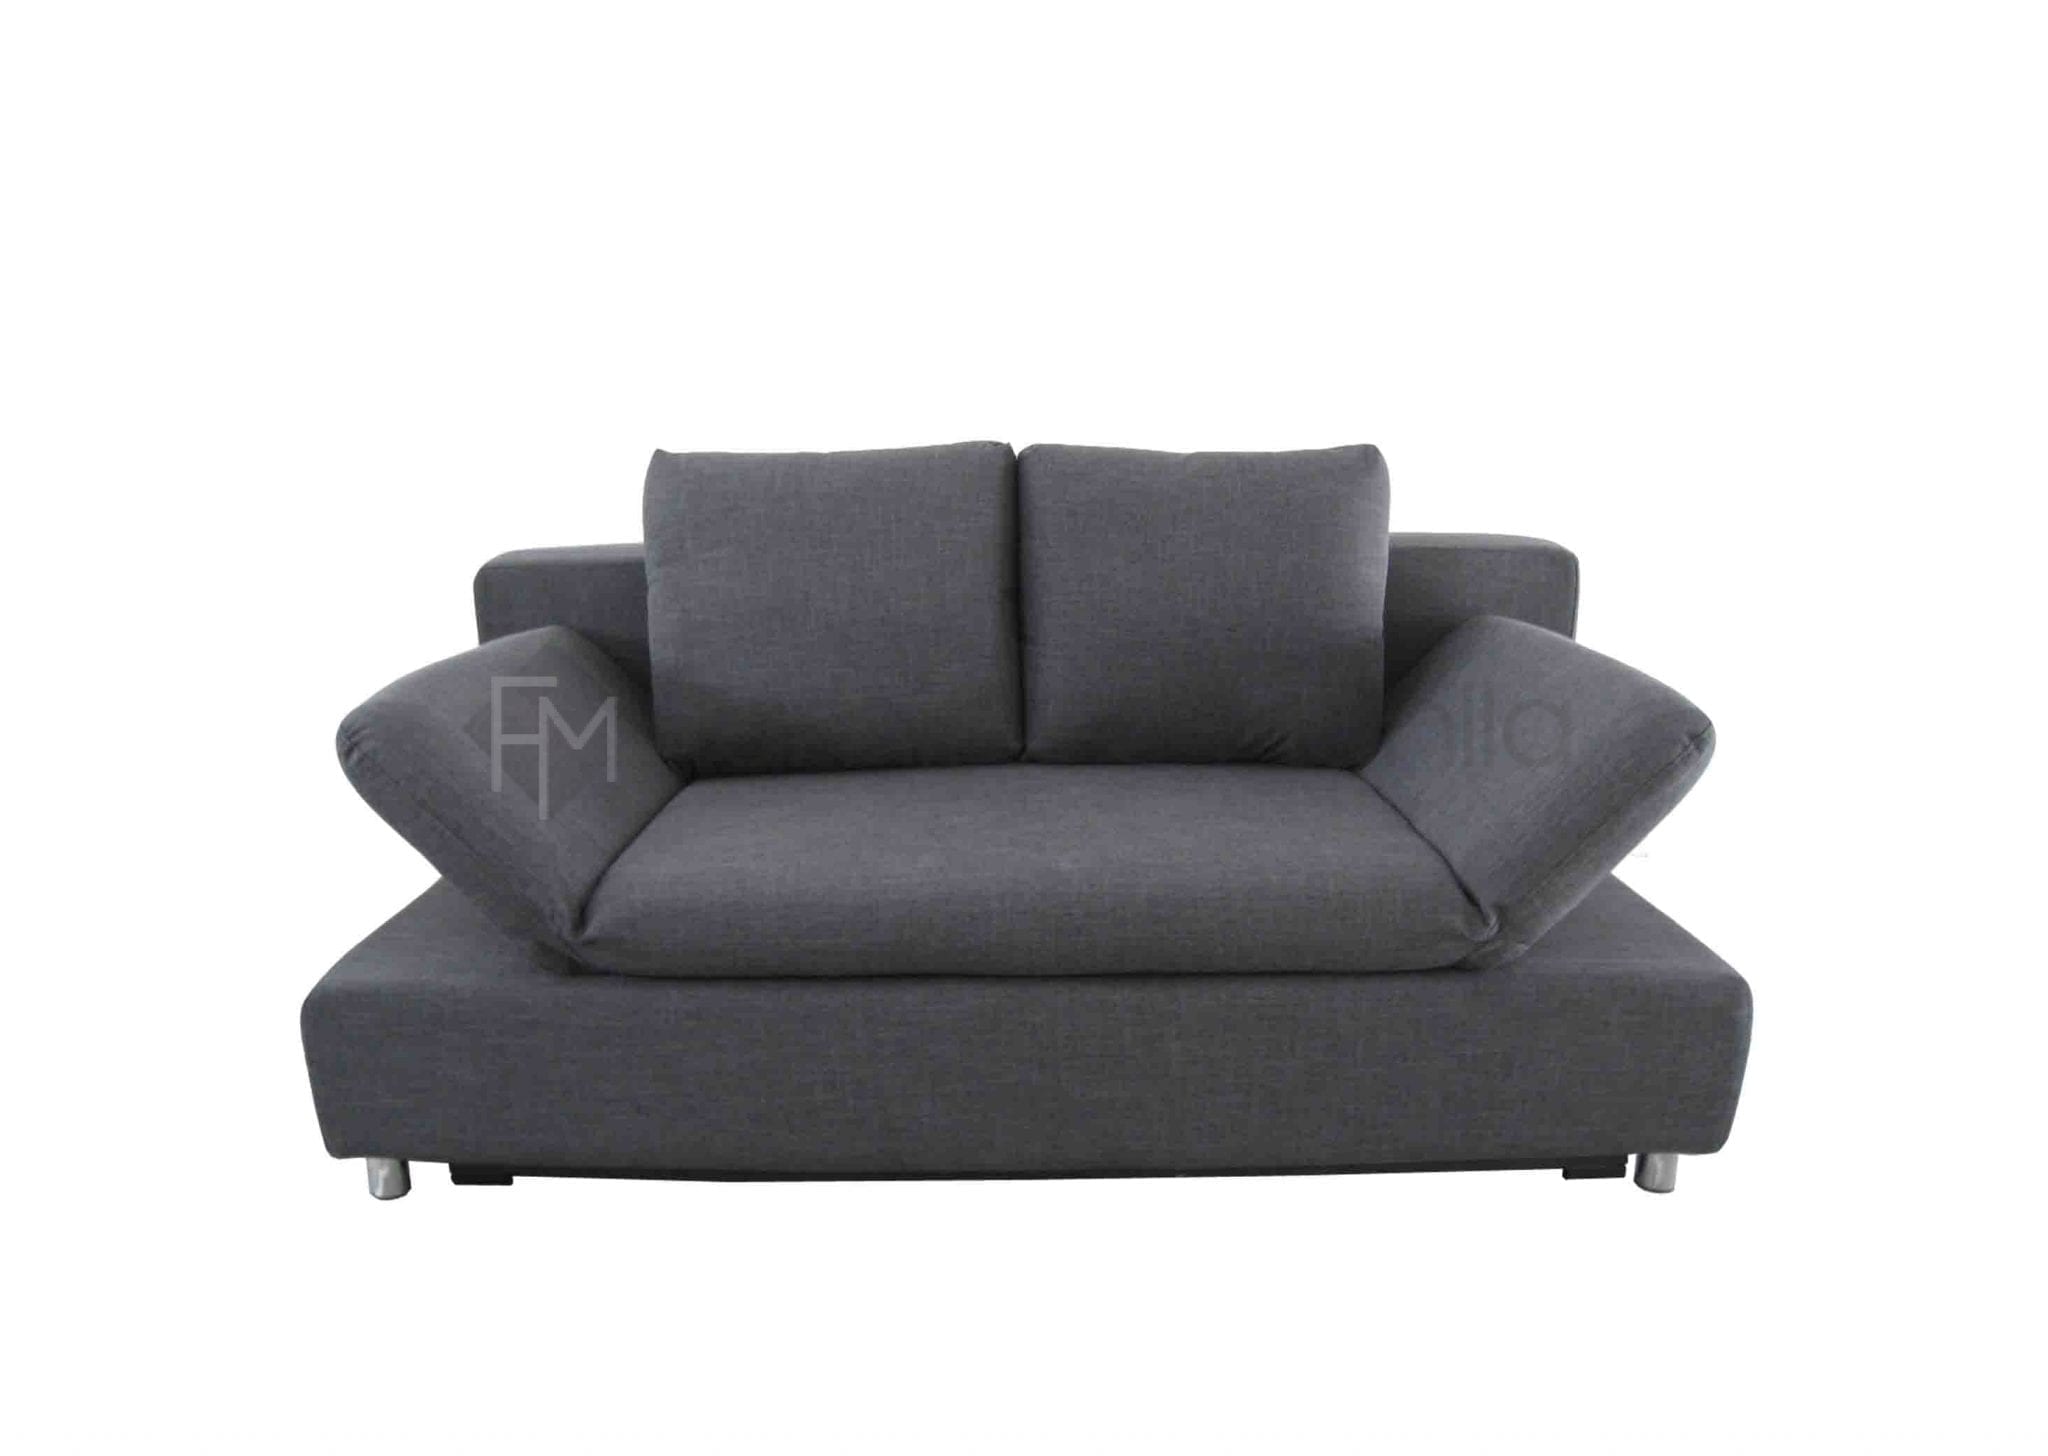 Sofa Bed With Storage Philippines